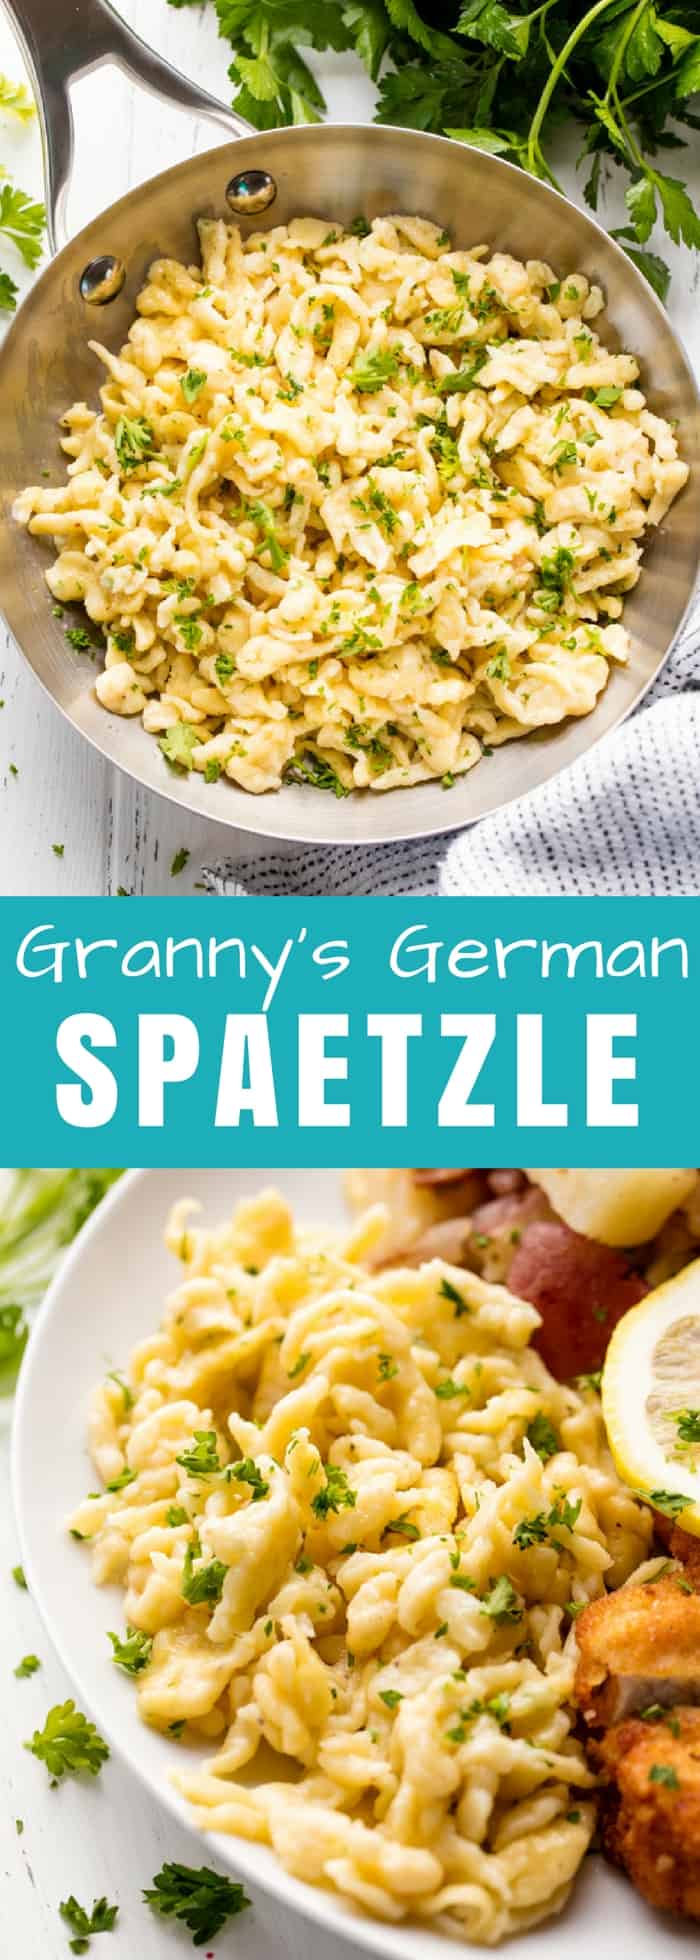 Granny's German Spaetzle is an authentic spaetzle recipe passed down in a German family for generations. Make it with or without a spaetzle maker. 